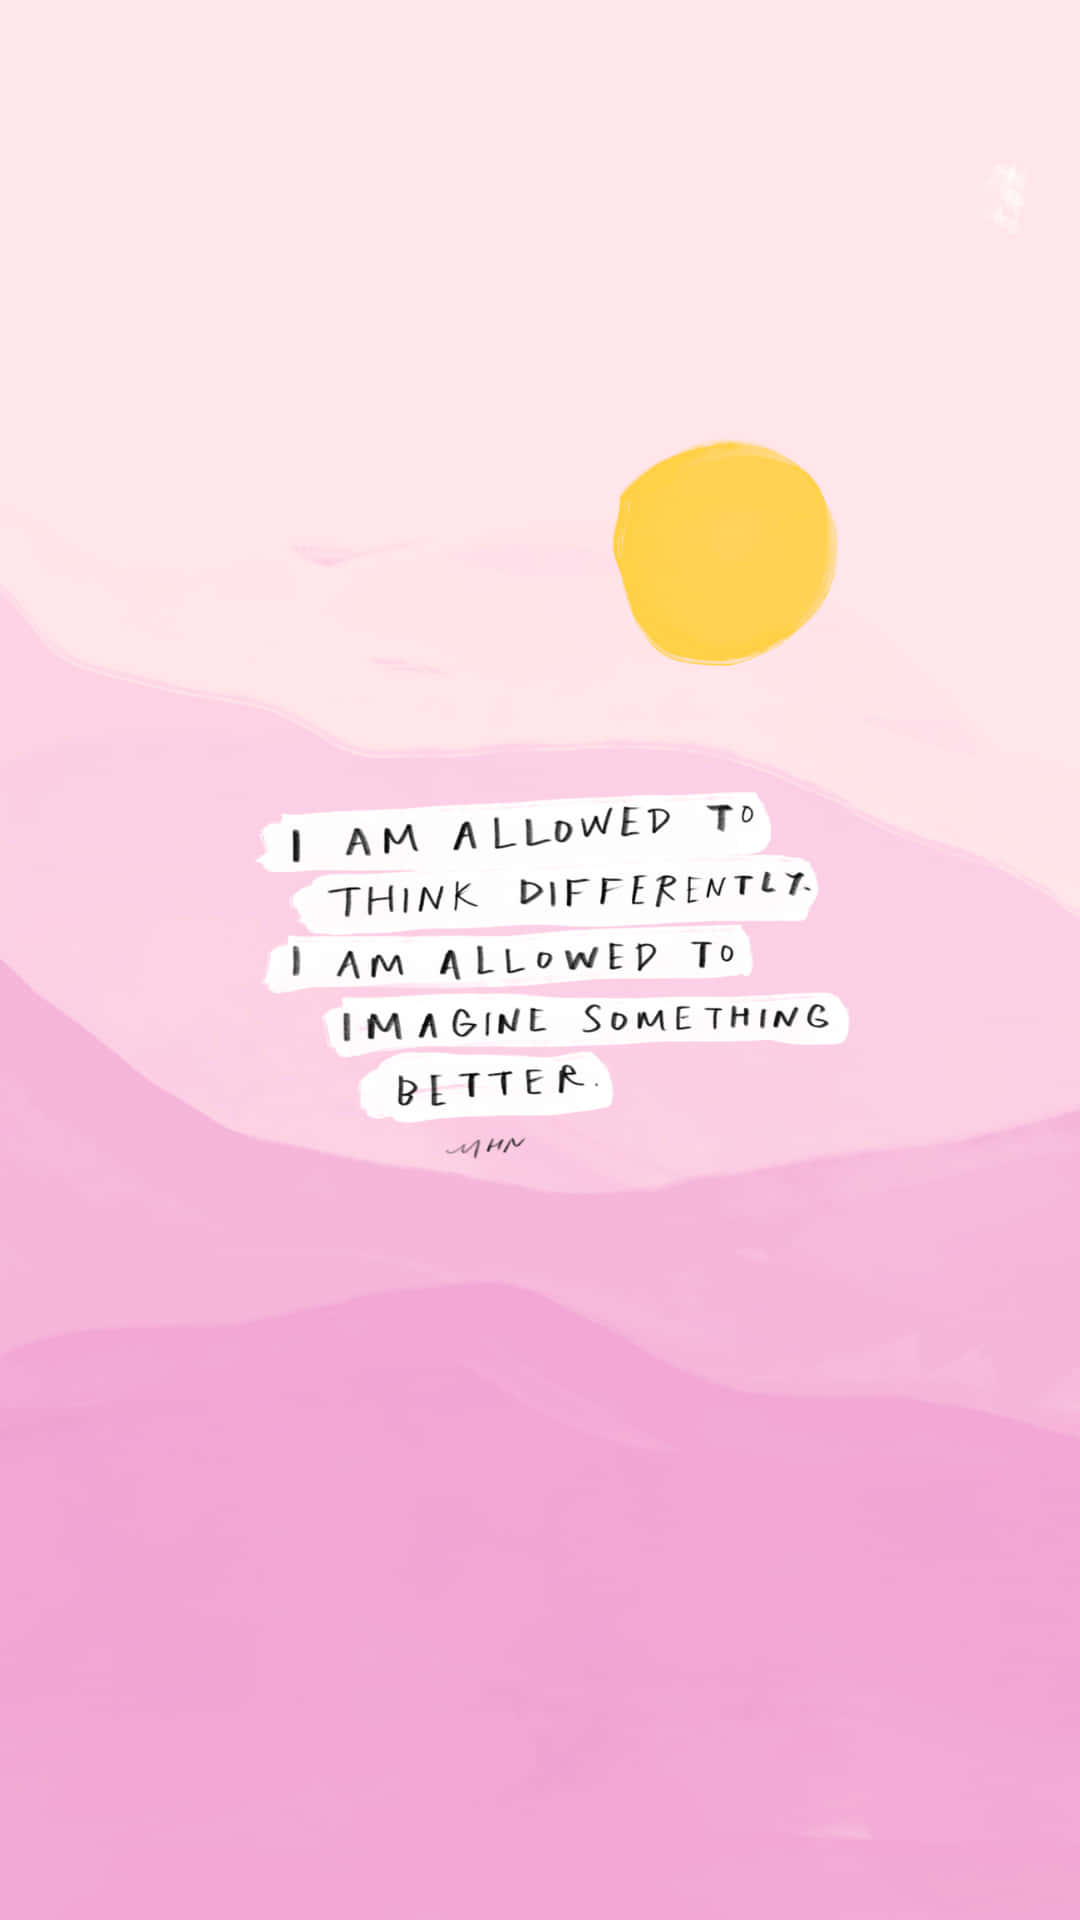 Positive Affirmations on a Colorful Background